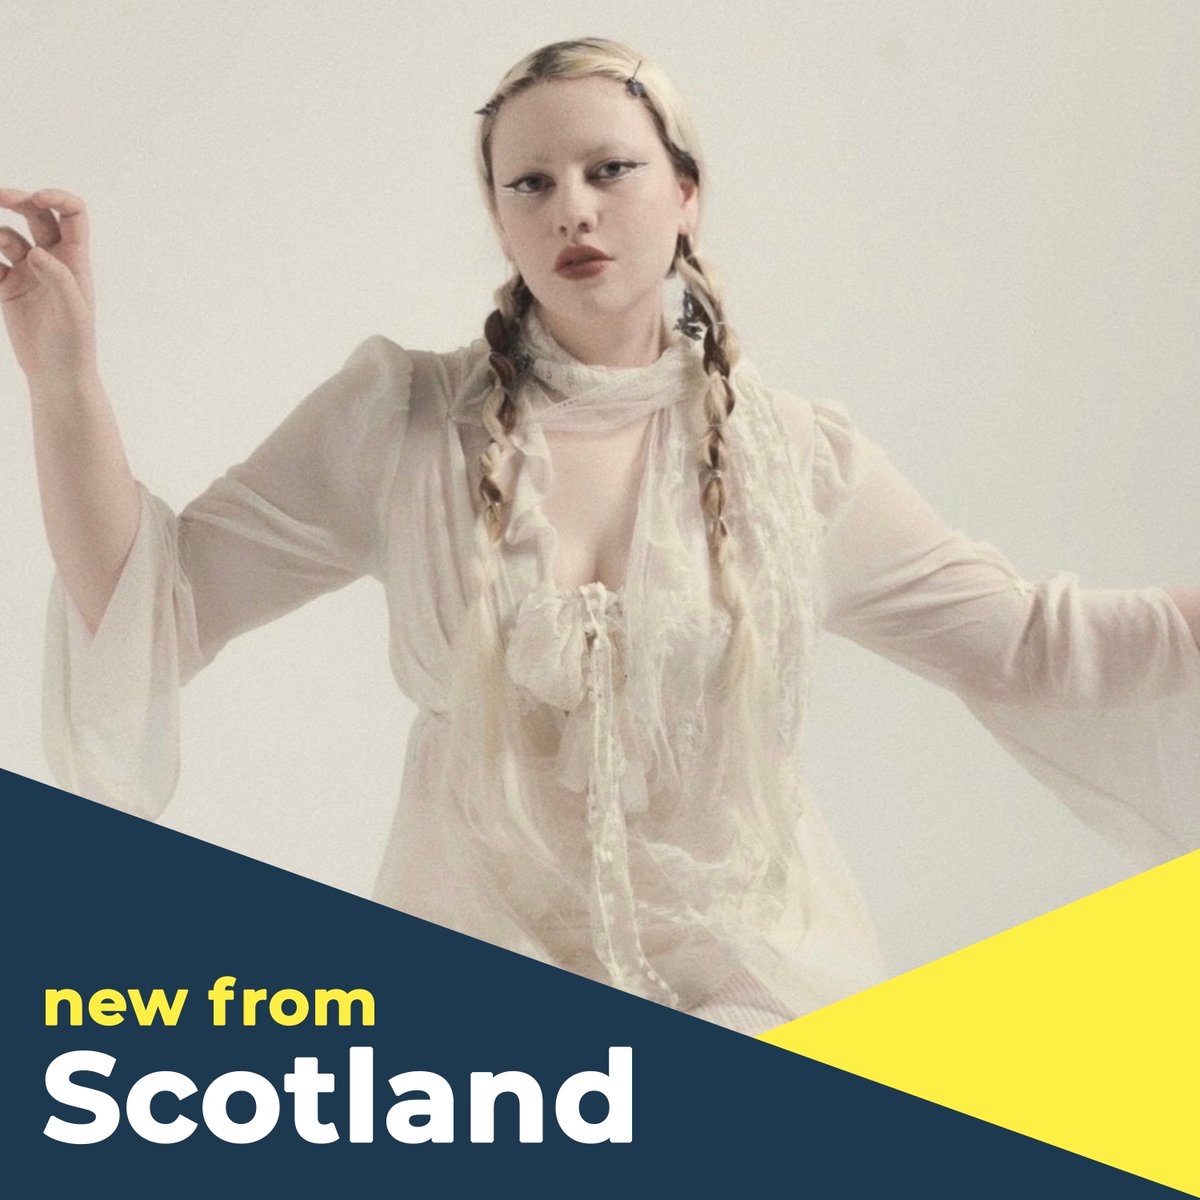 Happy Friday! Our New From Scotland playlist has just been updated with the latest releases from across Scotland! Check out new releases from Pearling, @bikinibodymusic, @LewisSings, @thejoyhotel, @majestypalmband, @waltdisco and more! Listen now 👉 wide.ink/NewScot